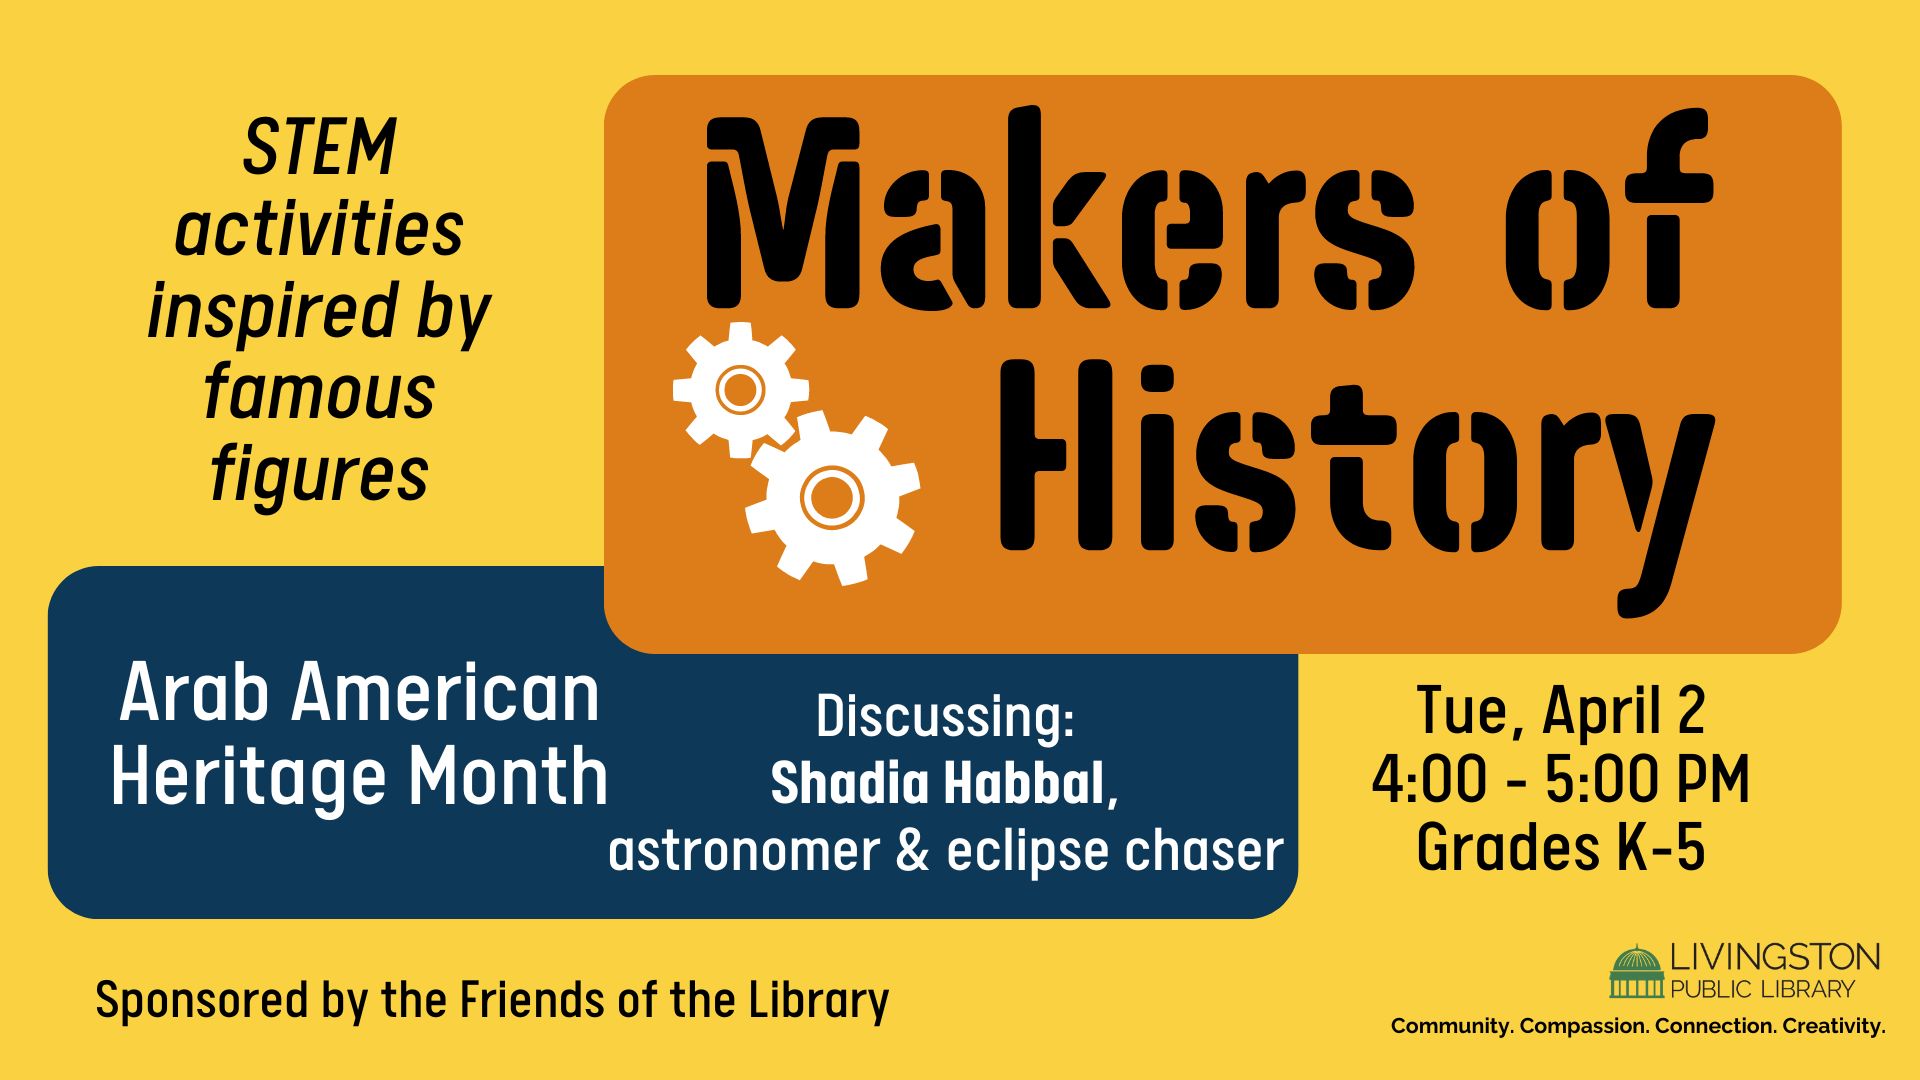 Makers of History: STEM activities inspired by famous figures. Arab American Heritage Month. Discussing: Shadia Habbal, astronomer & eclipse chaser. Tuesday, April 2nd. 4:00 - 5:00 PM. Grades K-5.  Sponsored by the Friends of the Library. Library logo. Community. Compassion. Connection. Creativity.